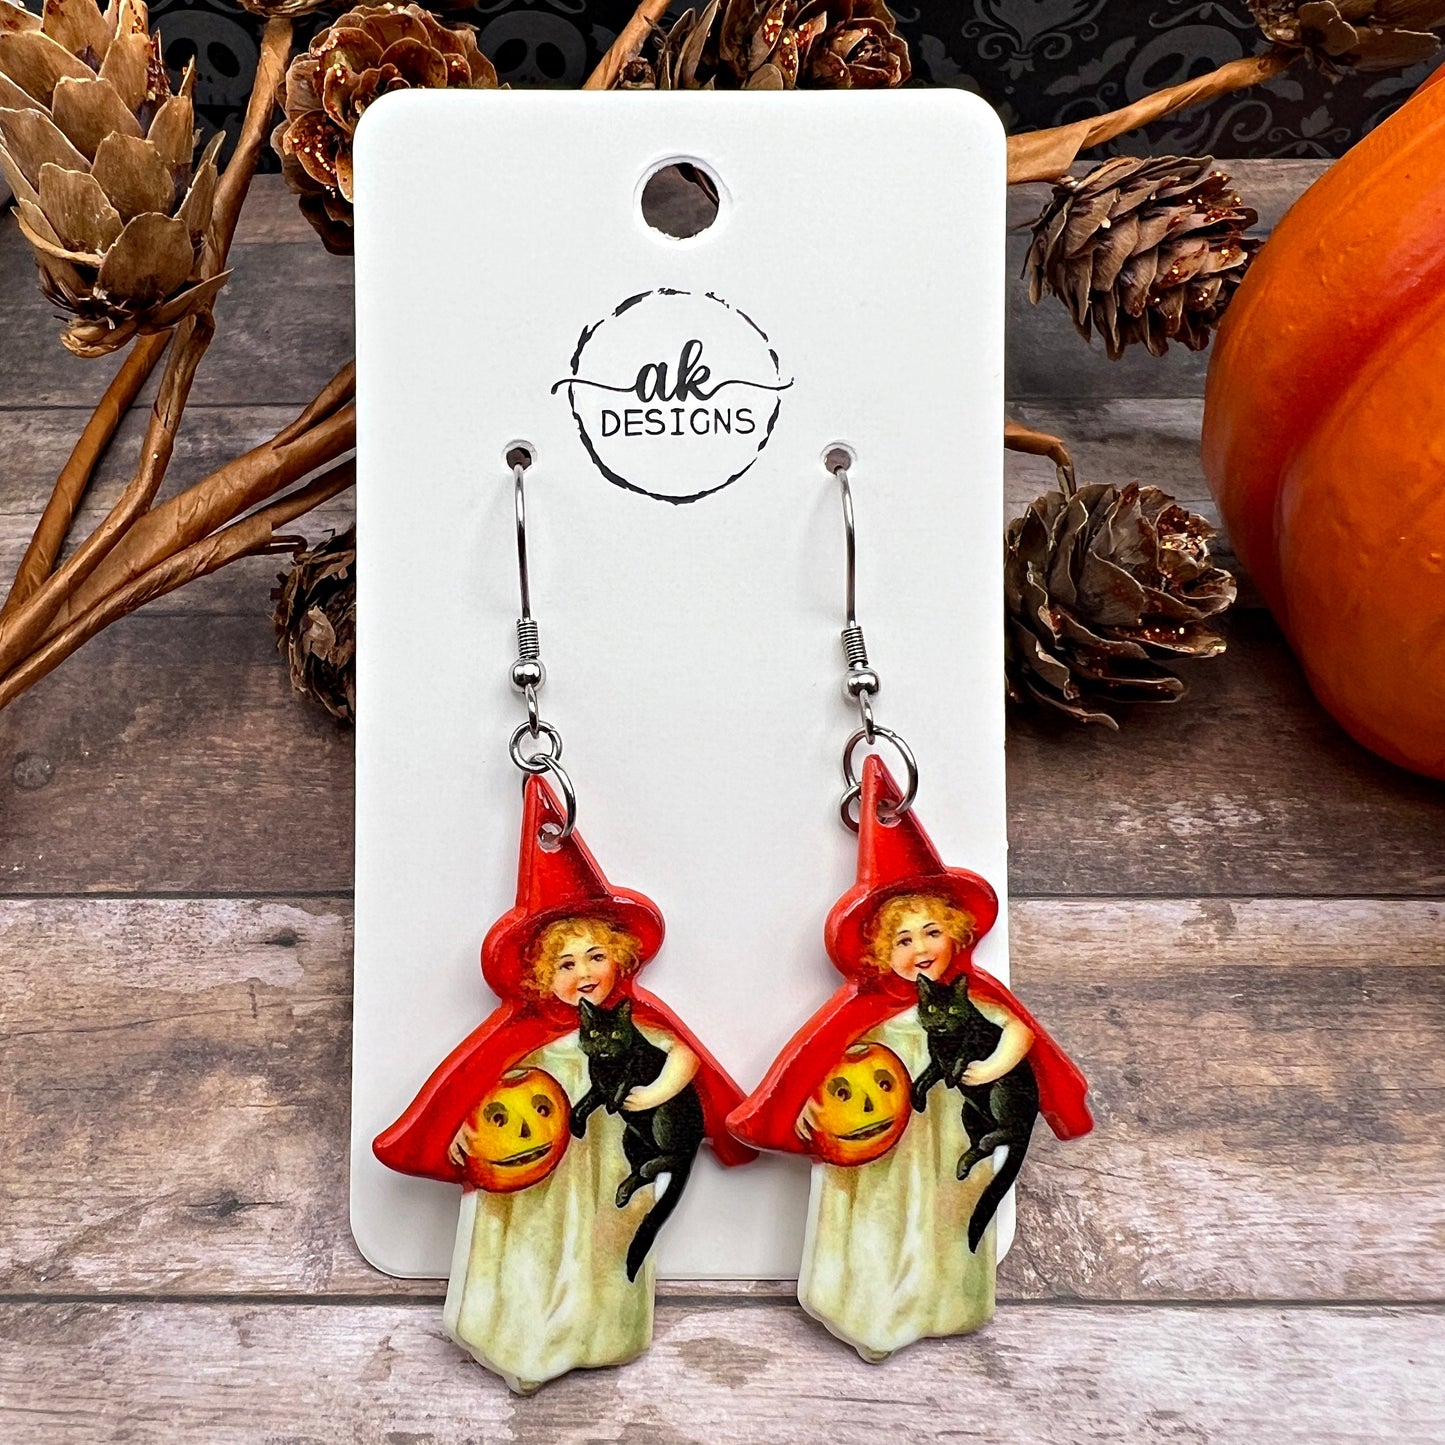 Vintage Retro Inspired Halloween Earrings, Witch Black Cat, Silver/Silver-tone  Earrings, Hypoallergenic Gift